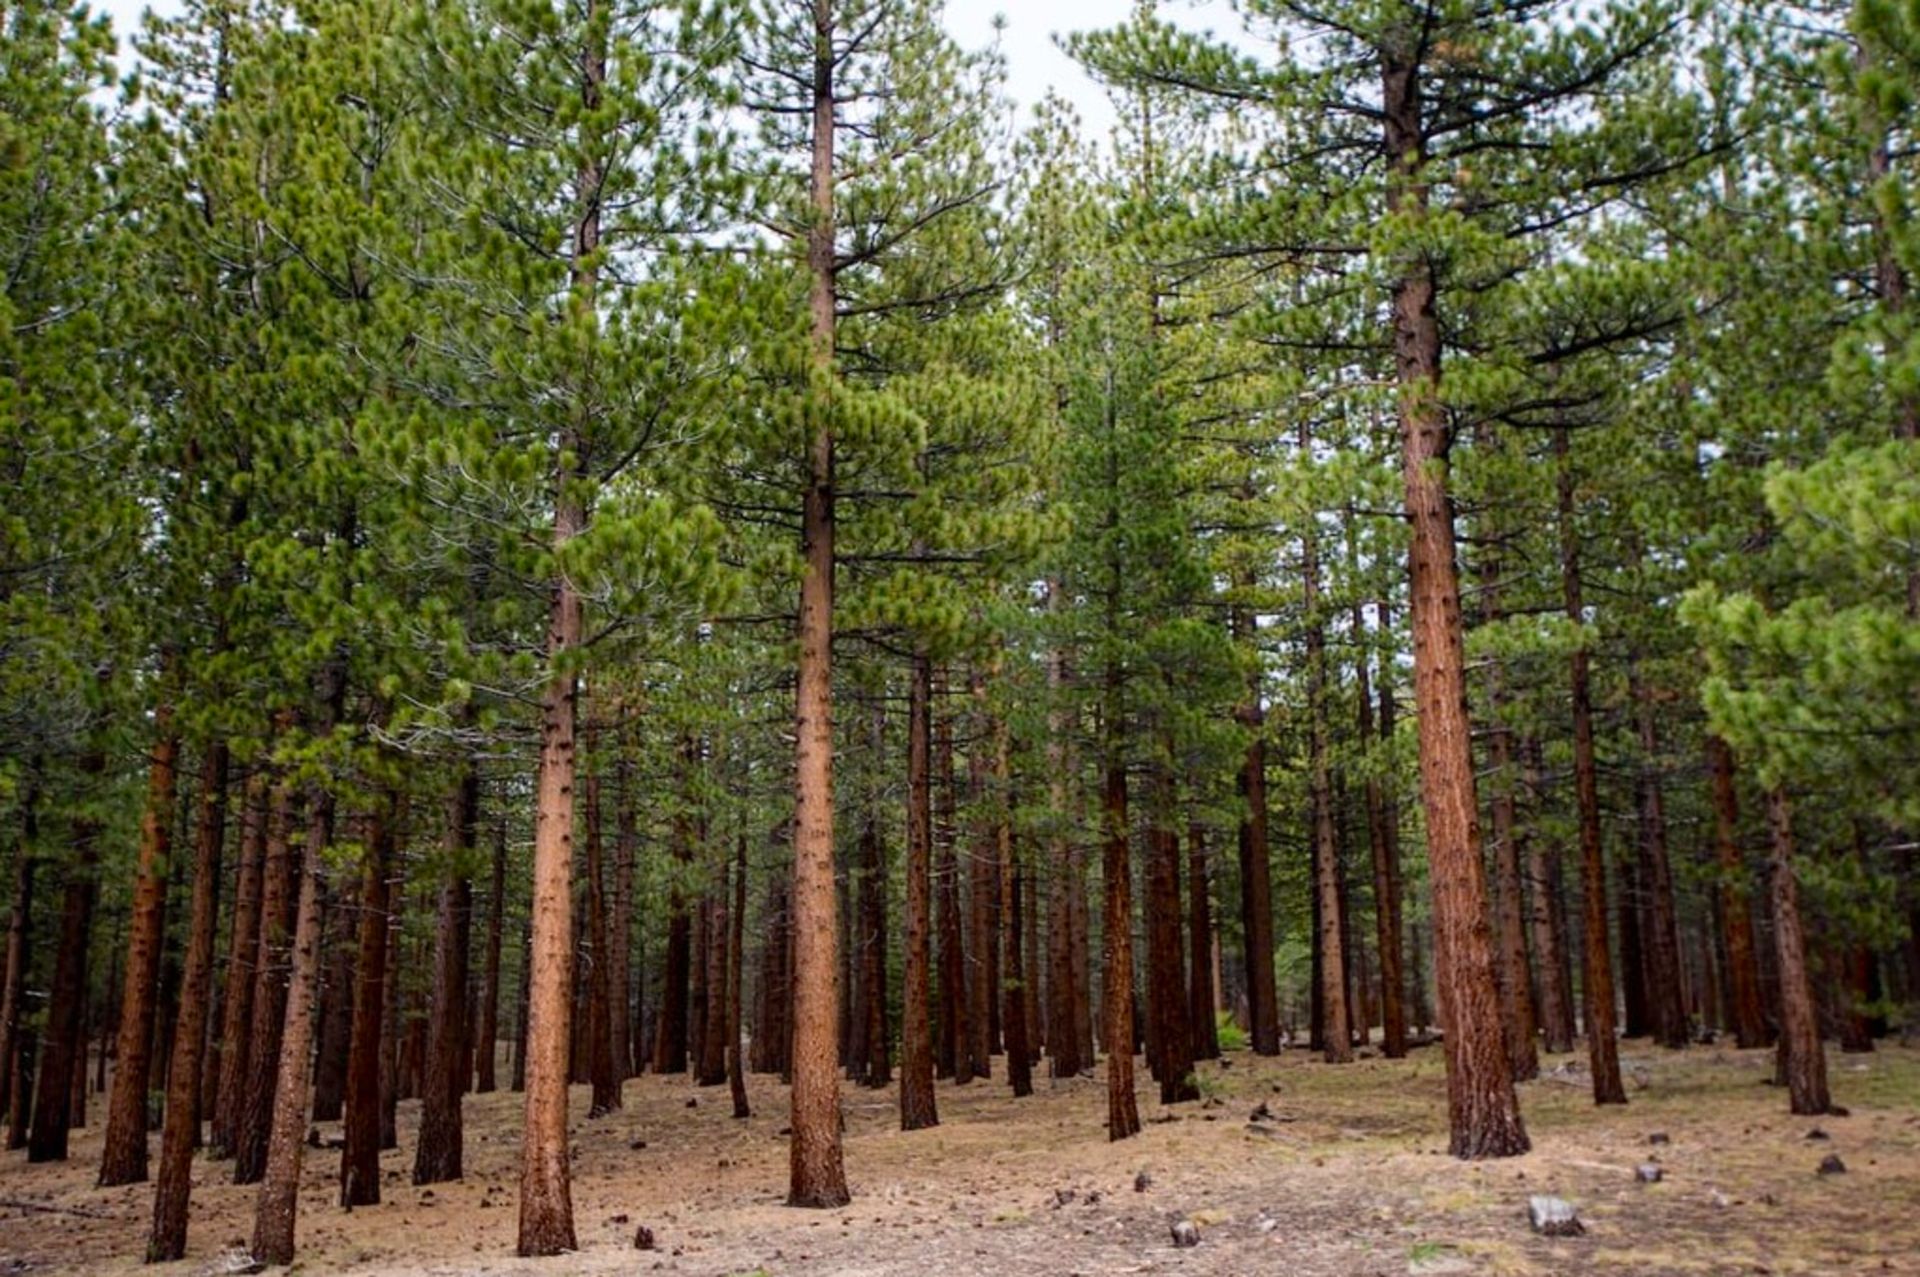 Over an Acre of Pine Forest in California Pines, Modoc County, California! - Image 4 of 8